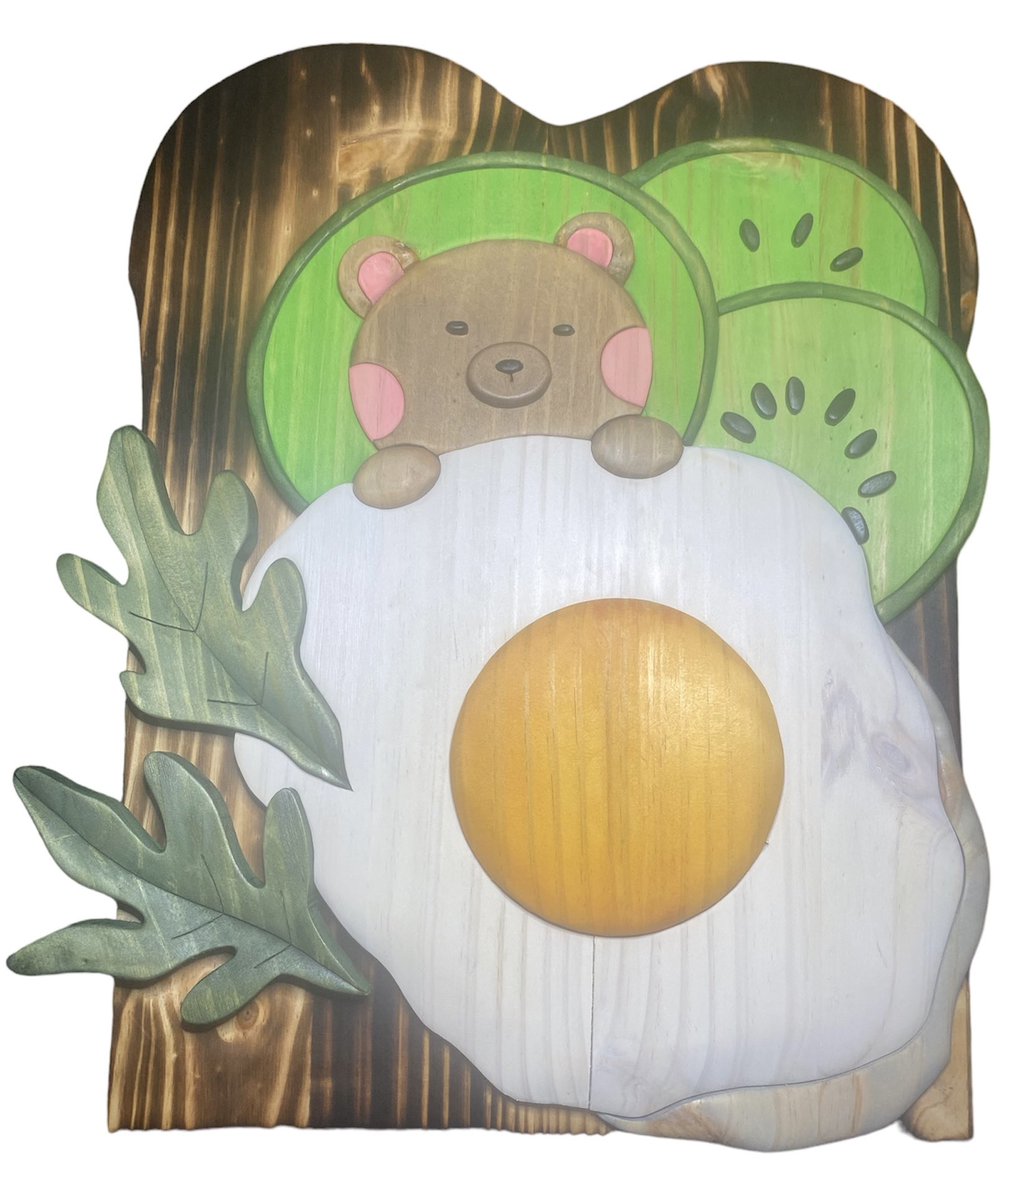 My daughters scrollsaw submission for a contest we both entered with a food theme.
This guy is too cute.